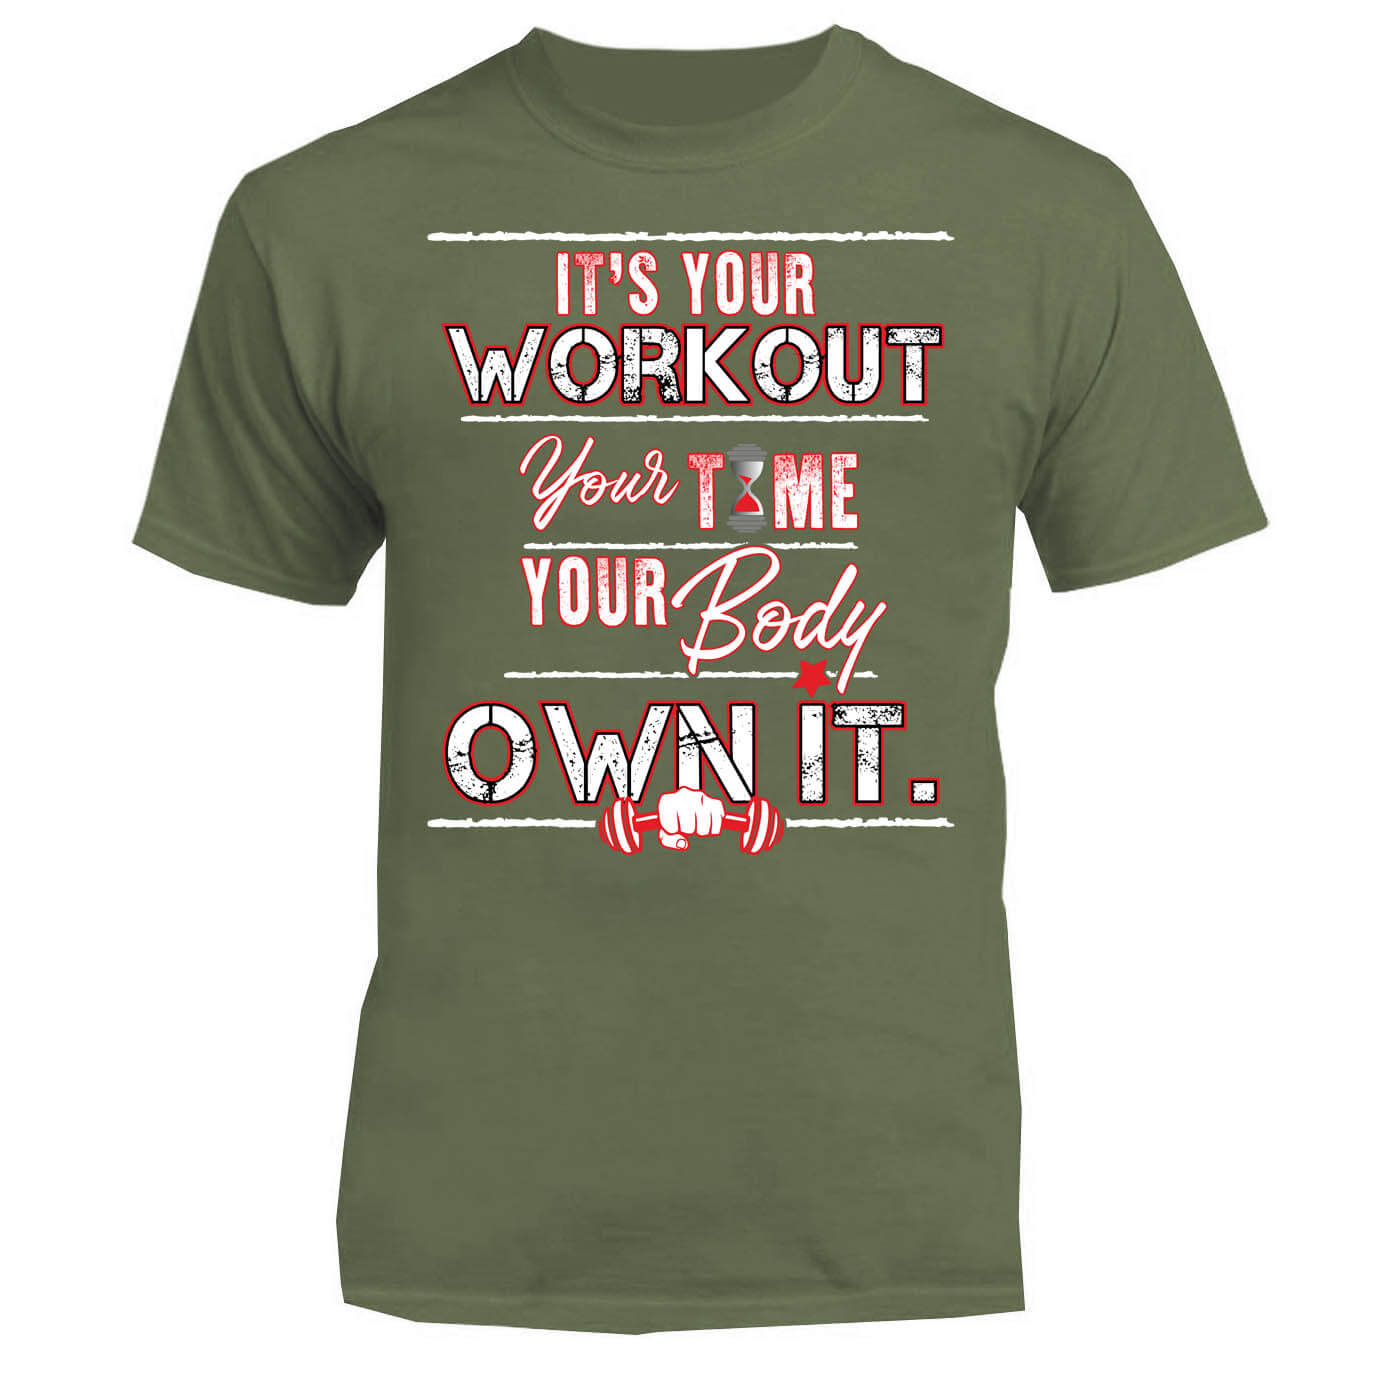 It's Your Workout